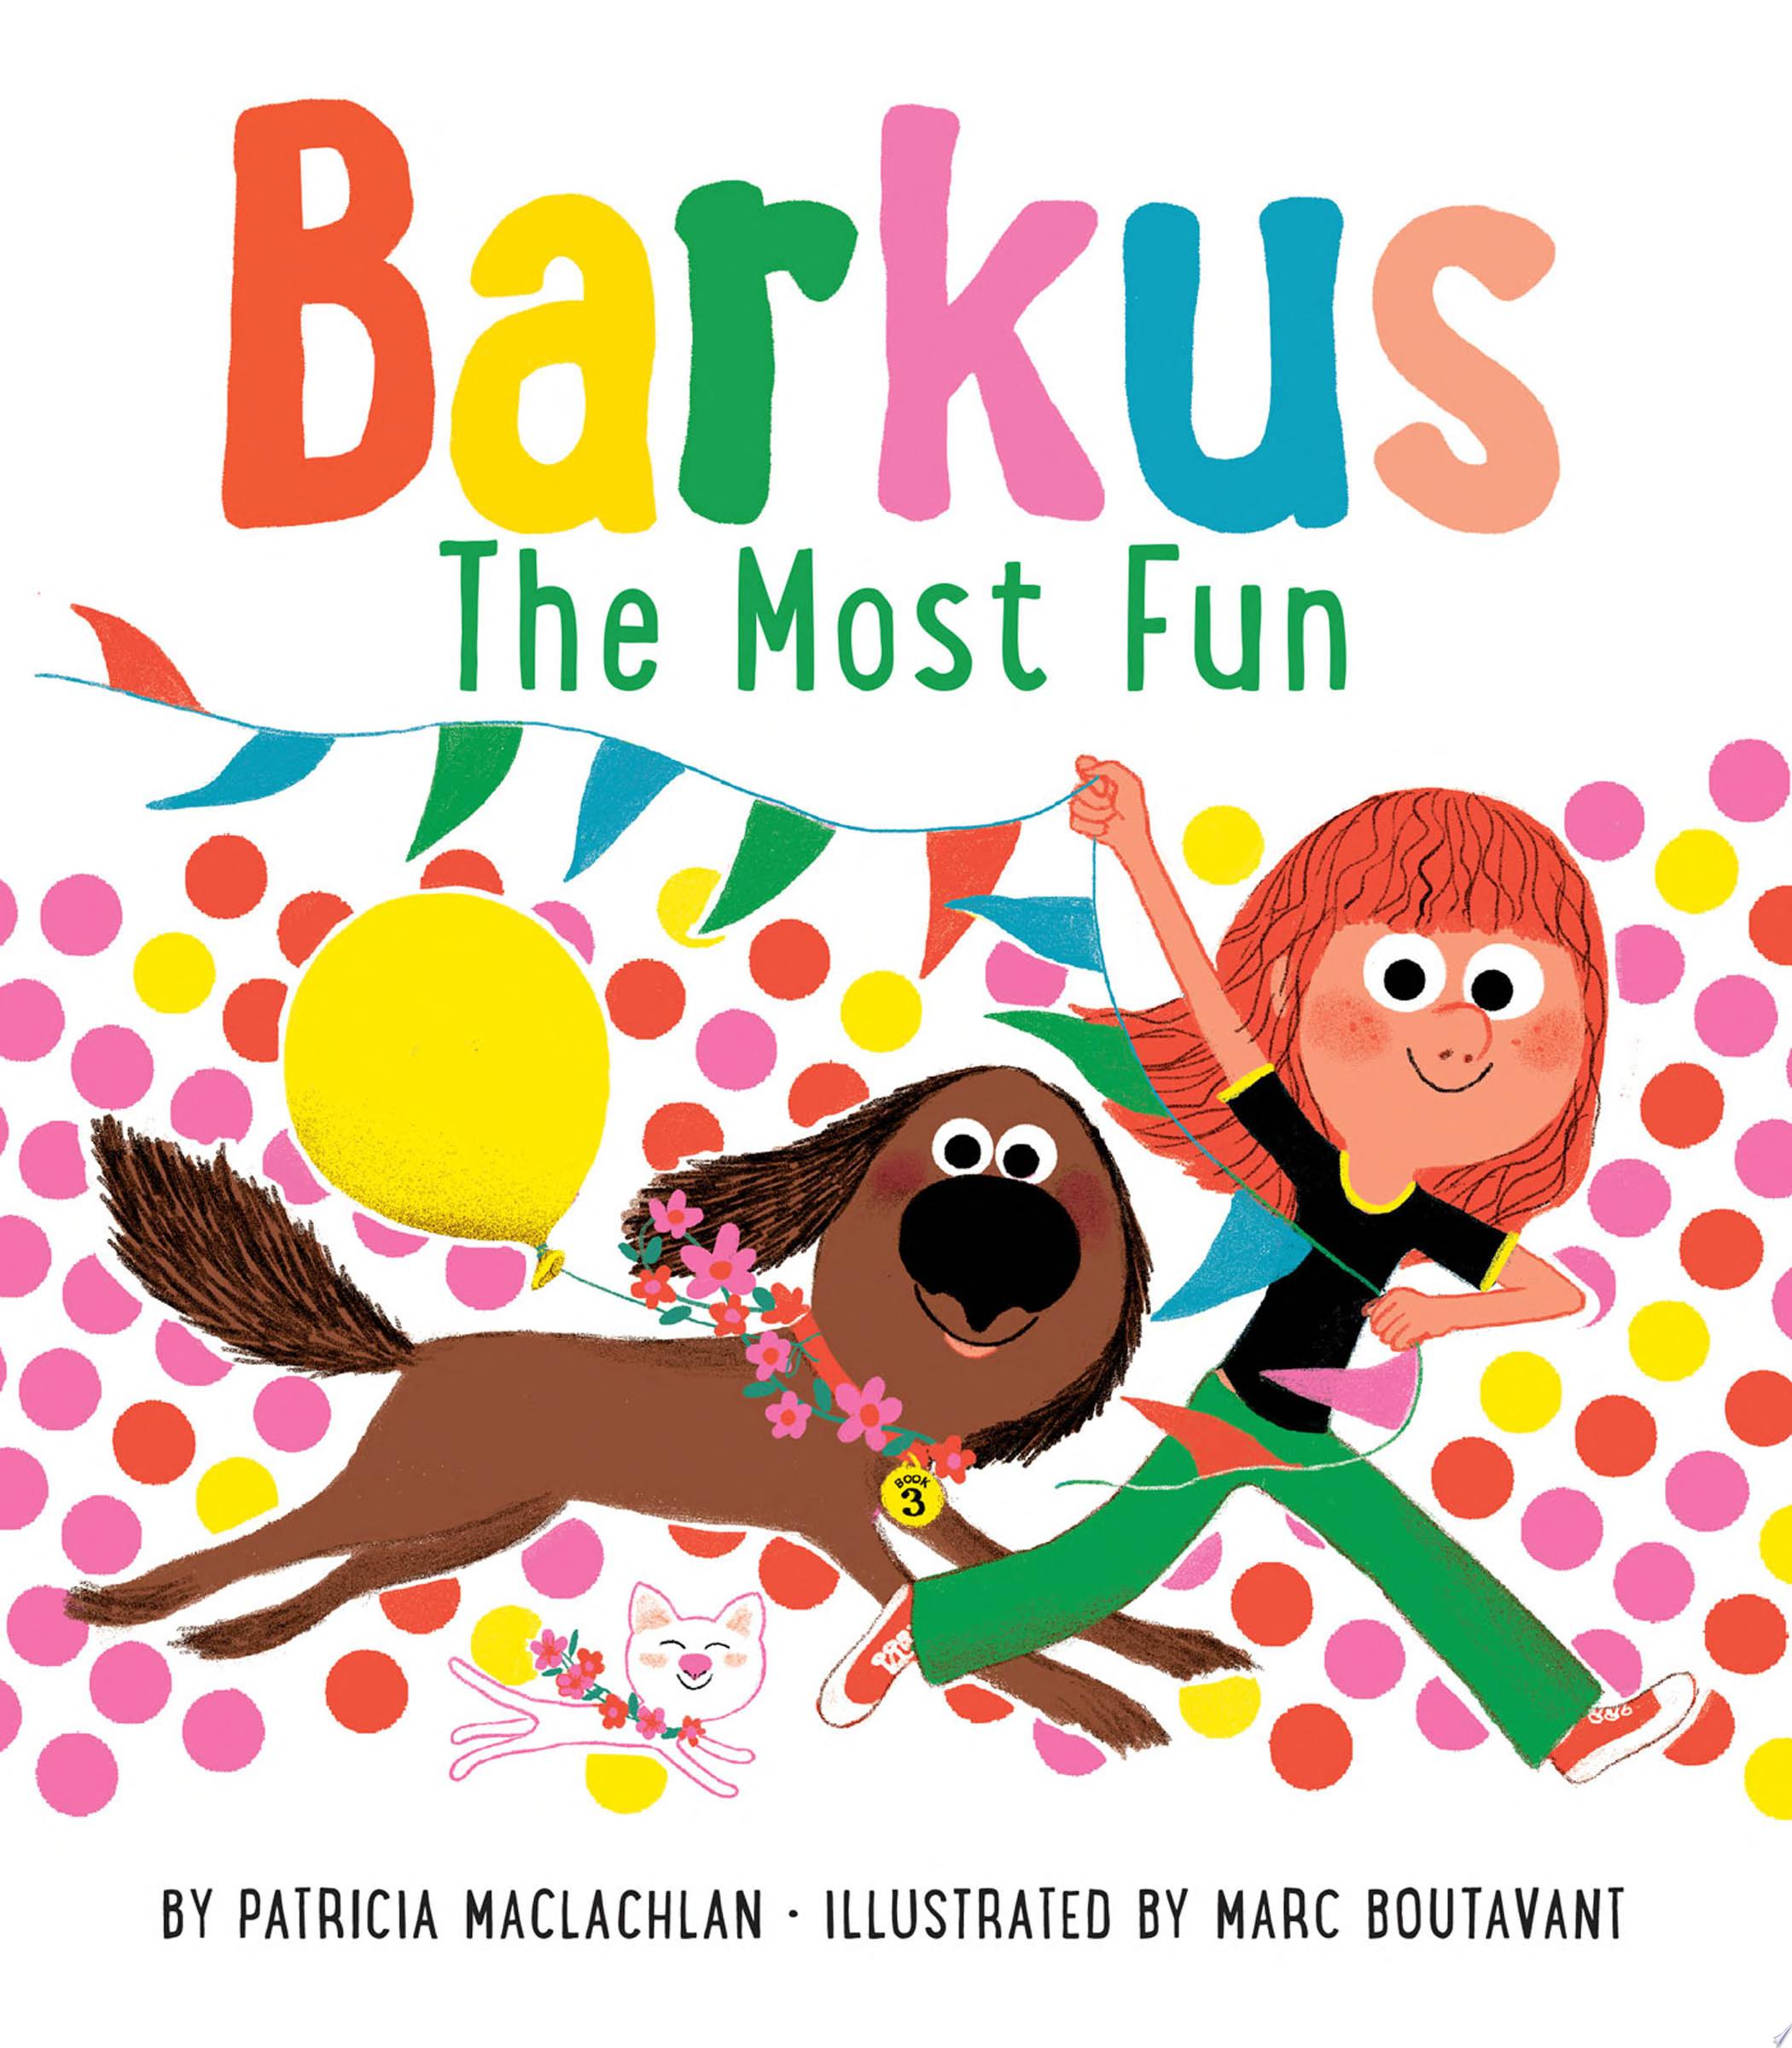 Image for "Barkus: The Most Fun"